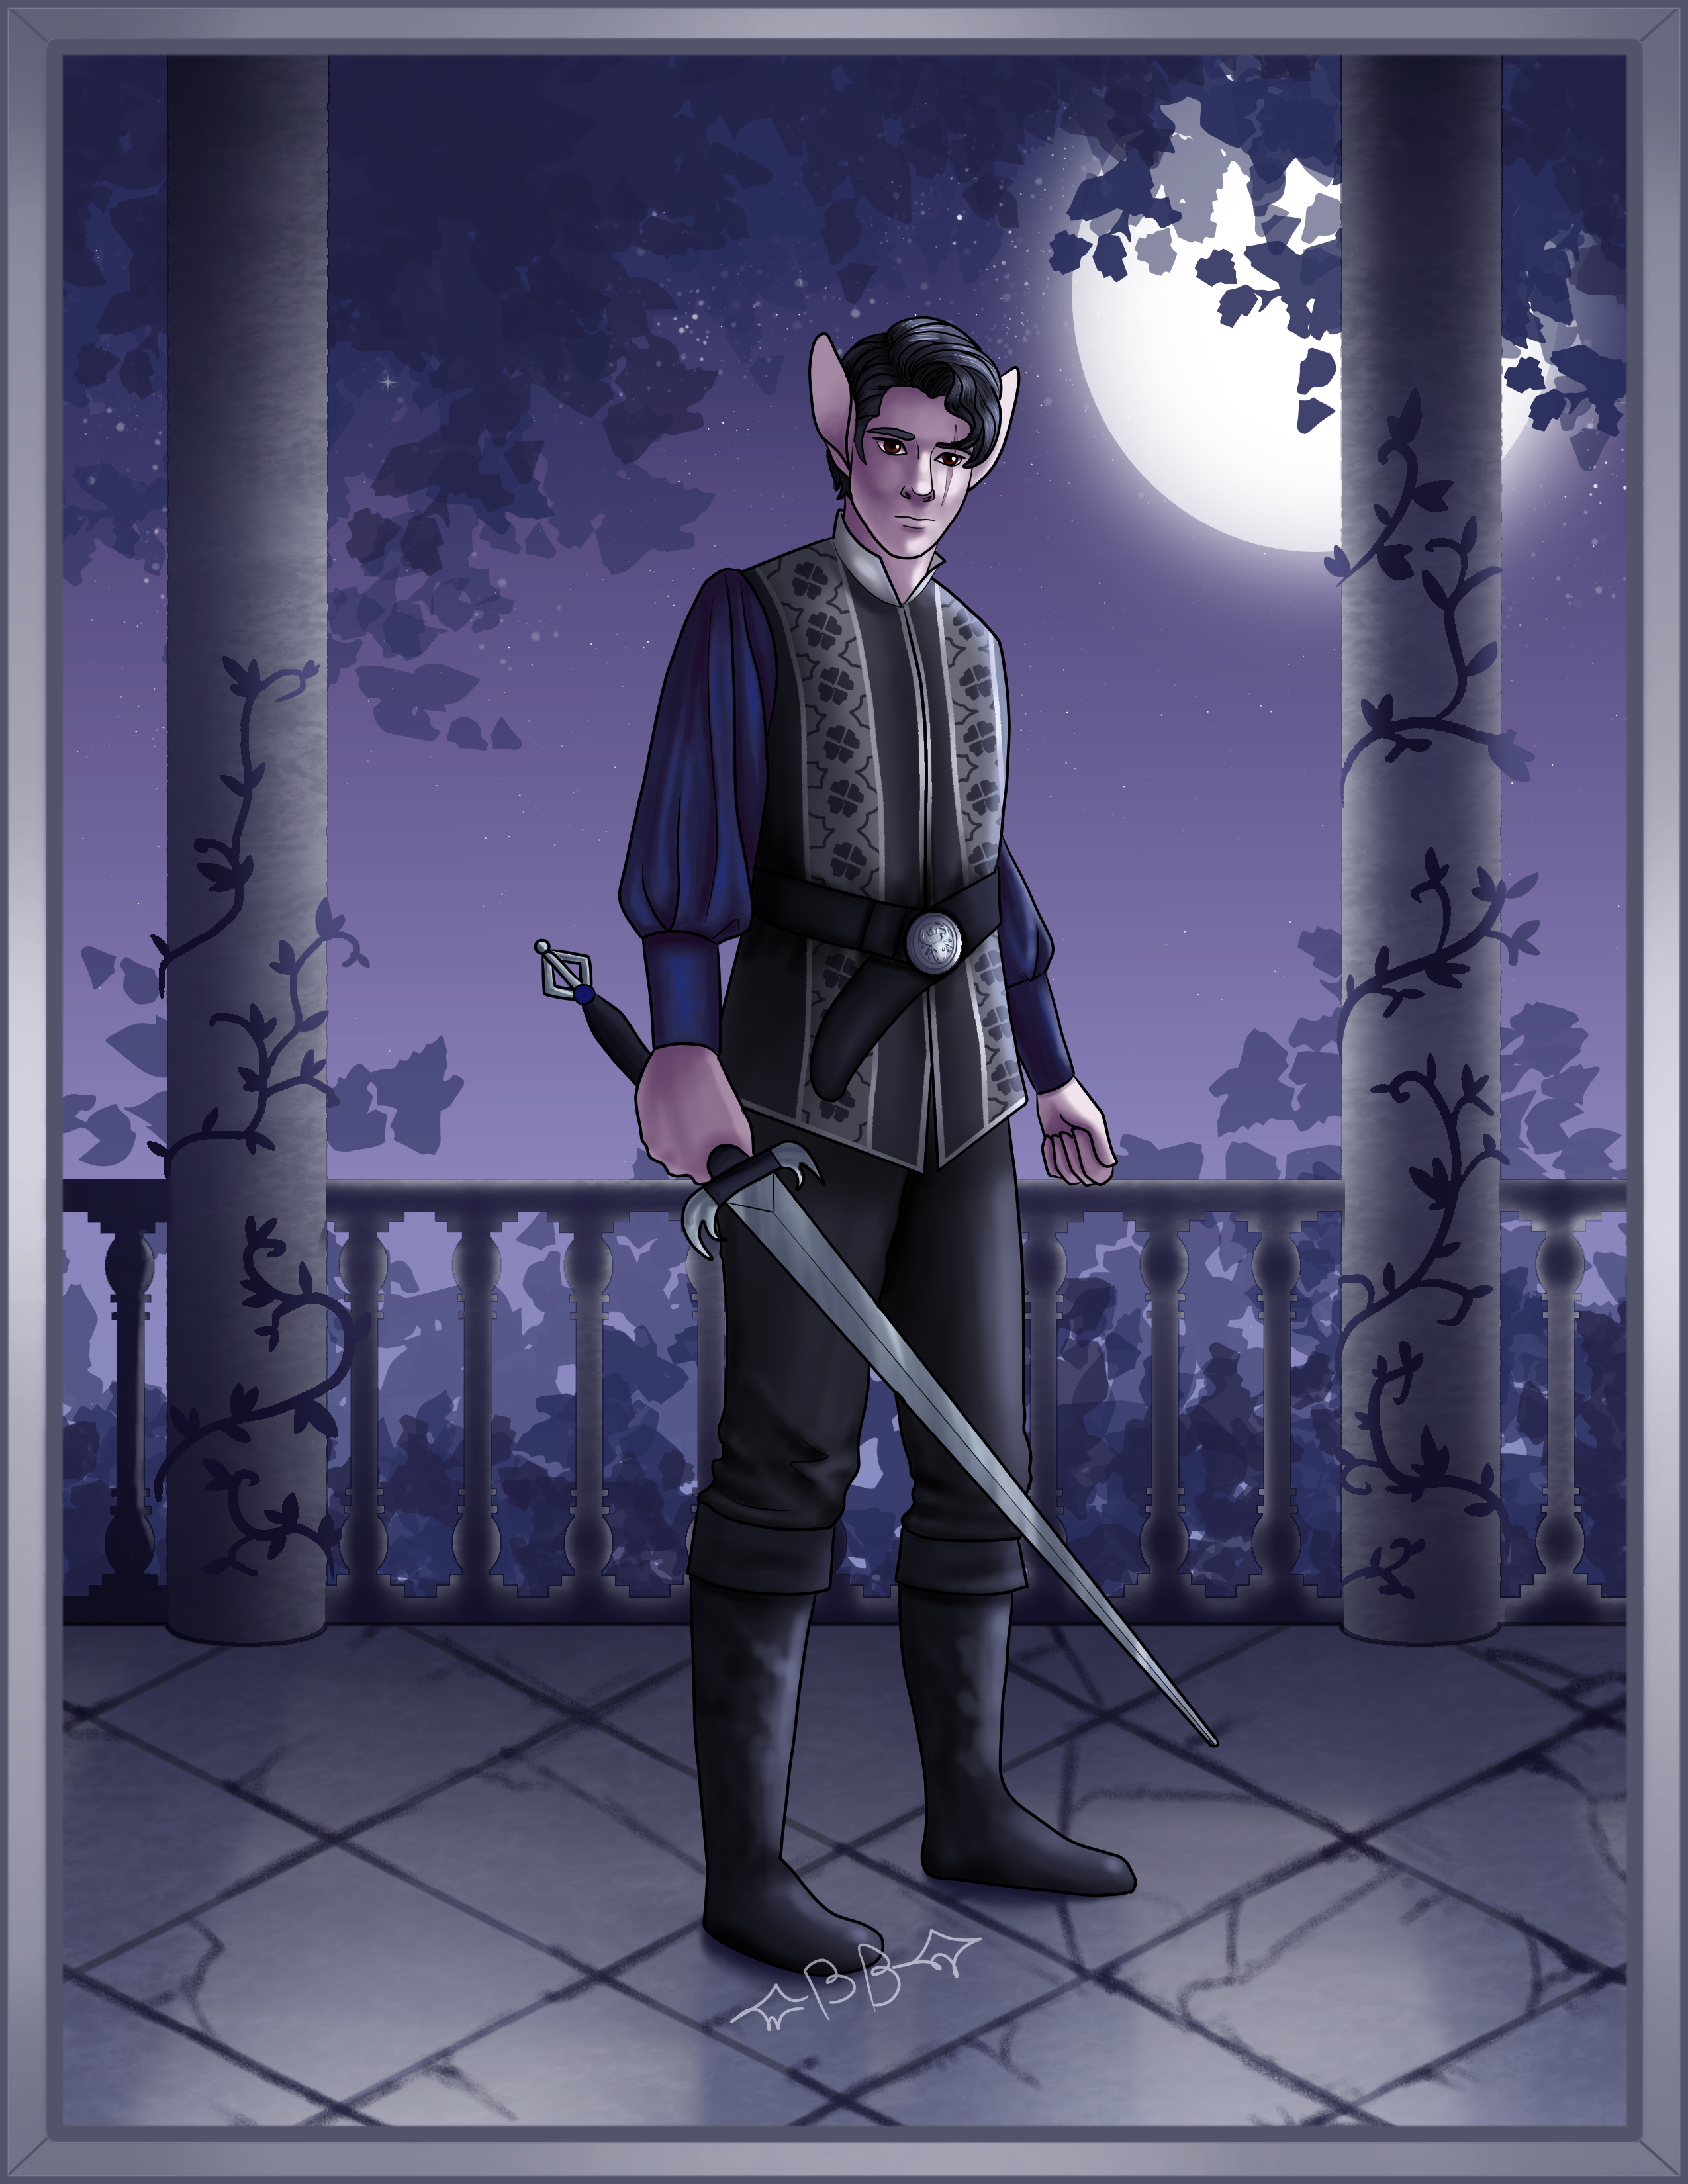 The regal, vampire Prince Erik standing with a sword in hand in the moonlight